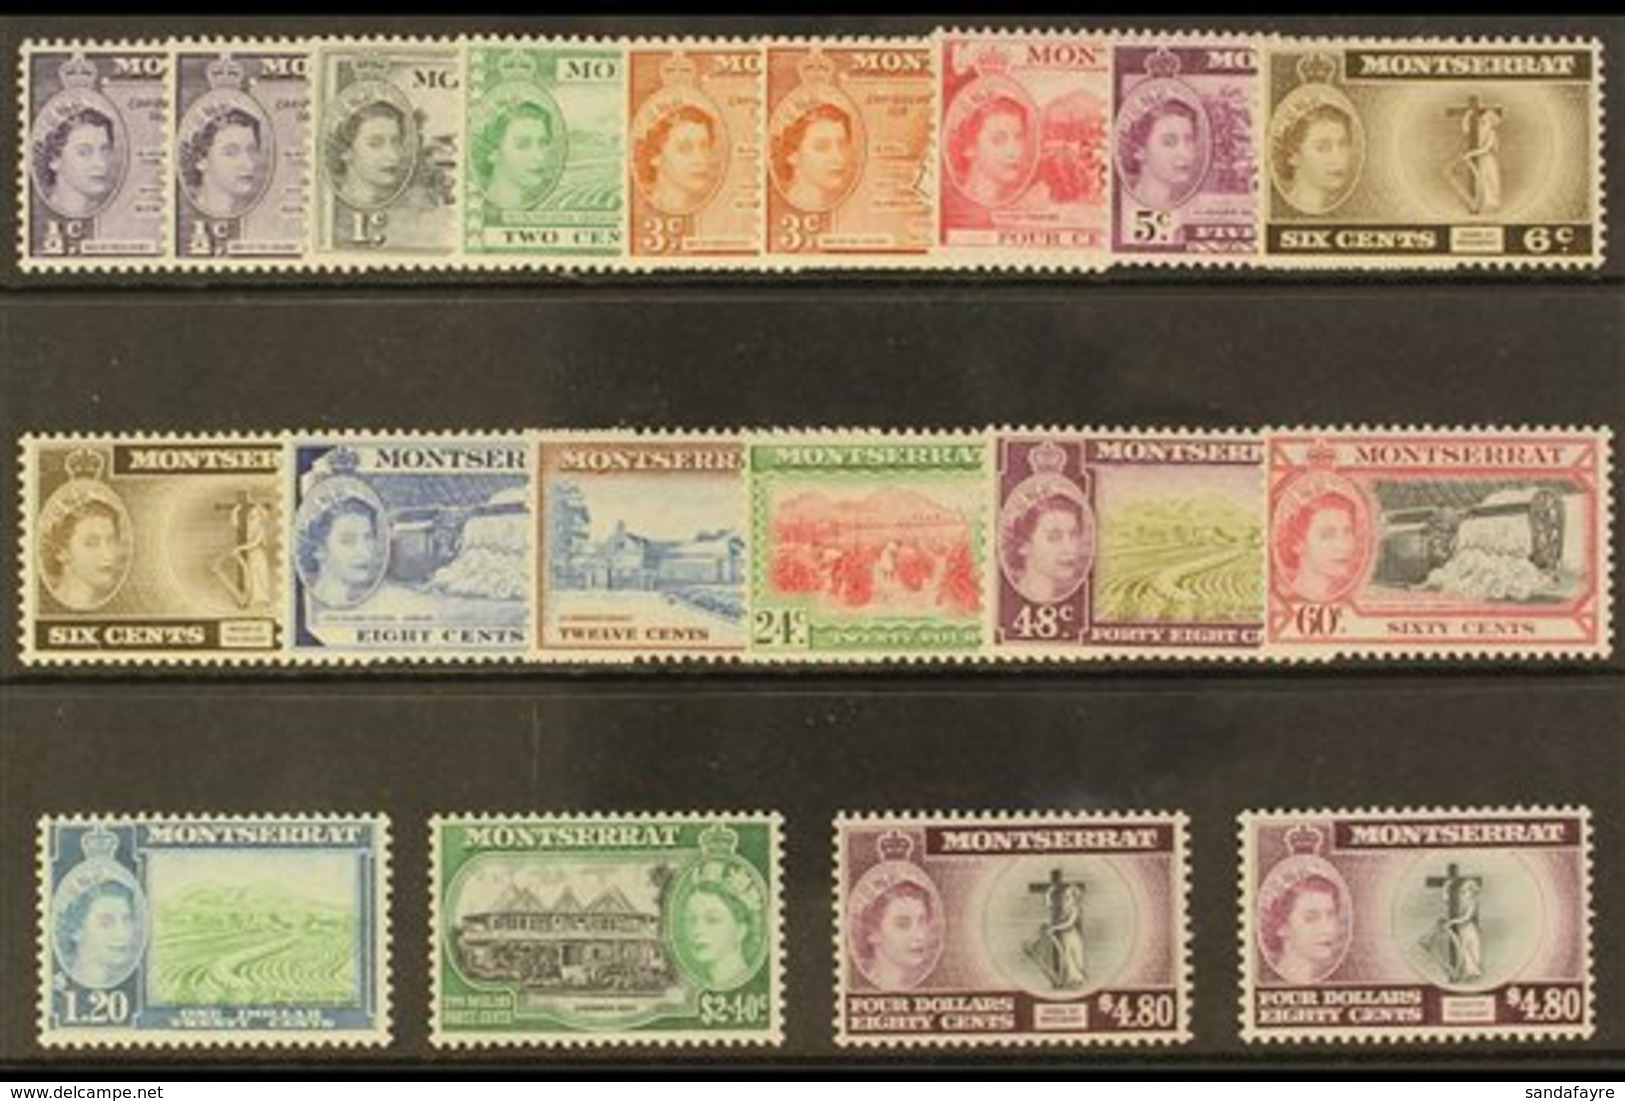 1953-62  Pictorial Definitive Set Plus All Four Type II Additional Printings, SG 136a/49a, Never Hinged Mint (19 Stamps) - Montserrat